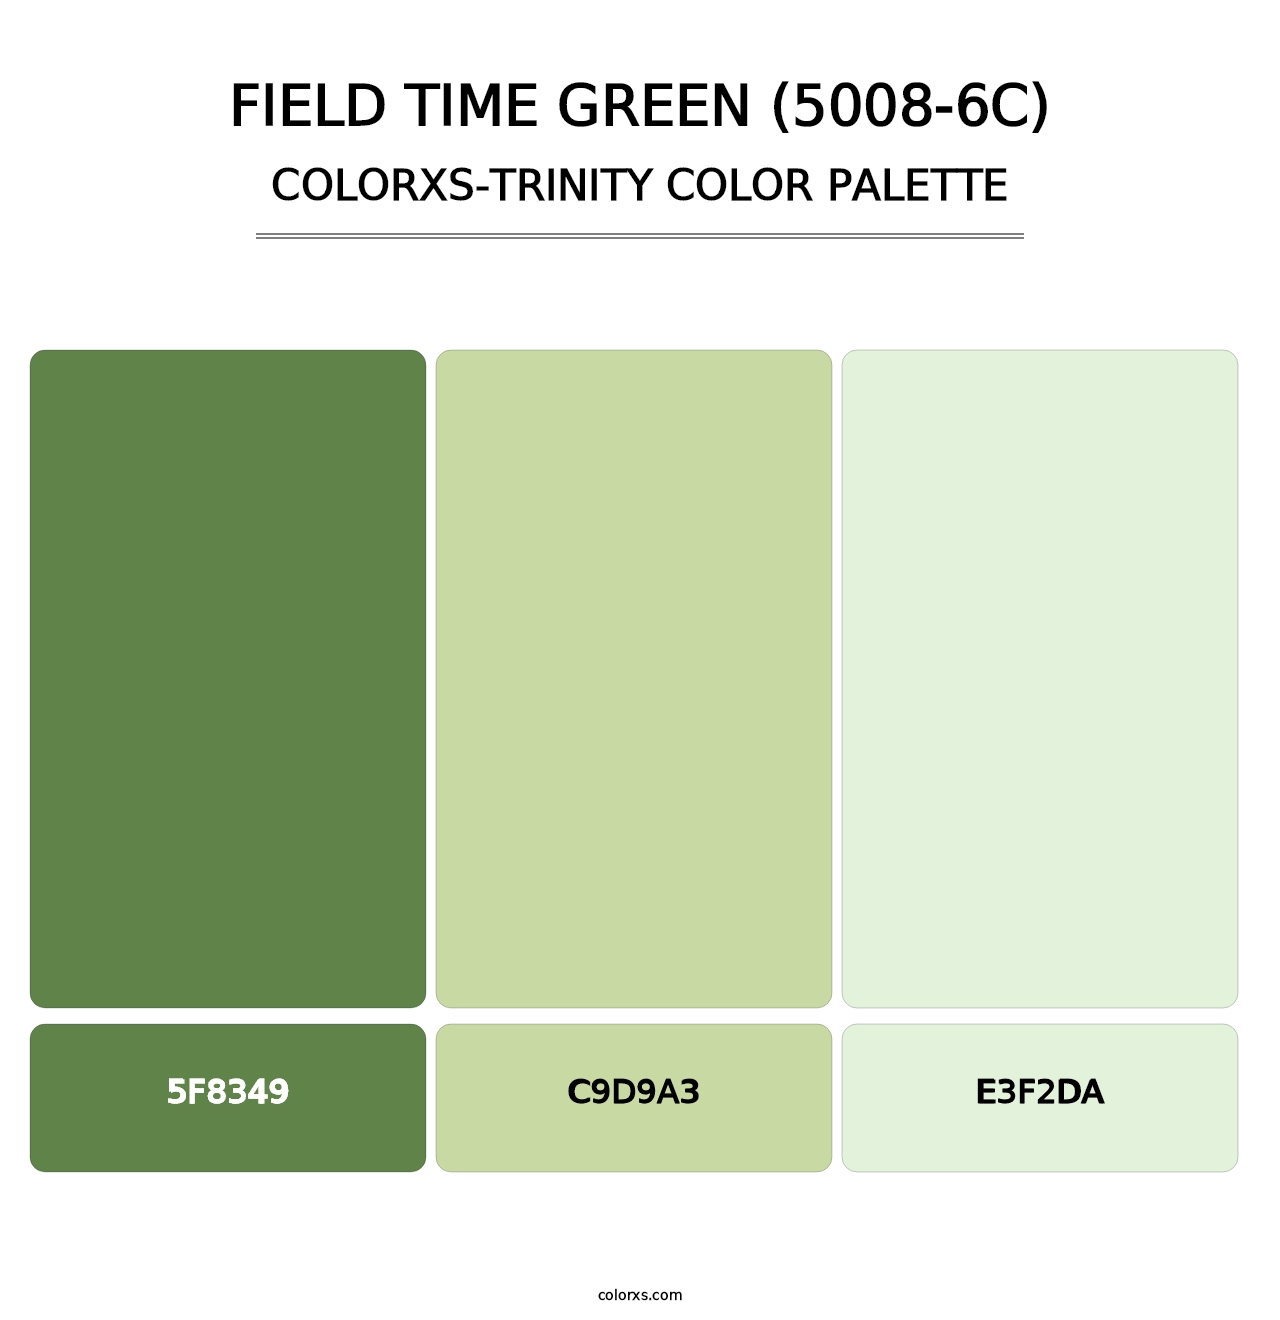 Field Time Green (5008-6C) - Colorxs Trinity Palette